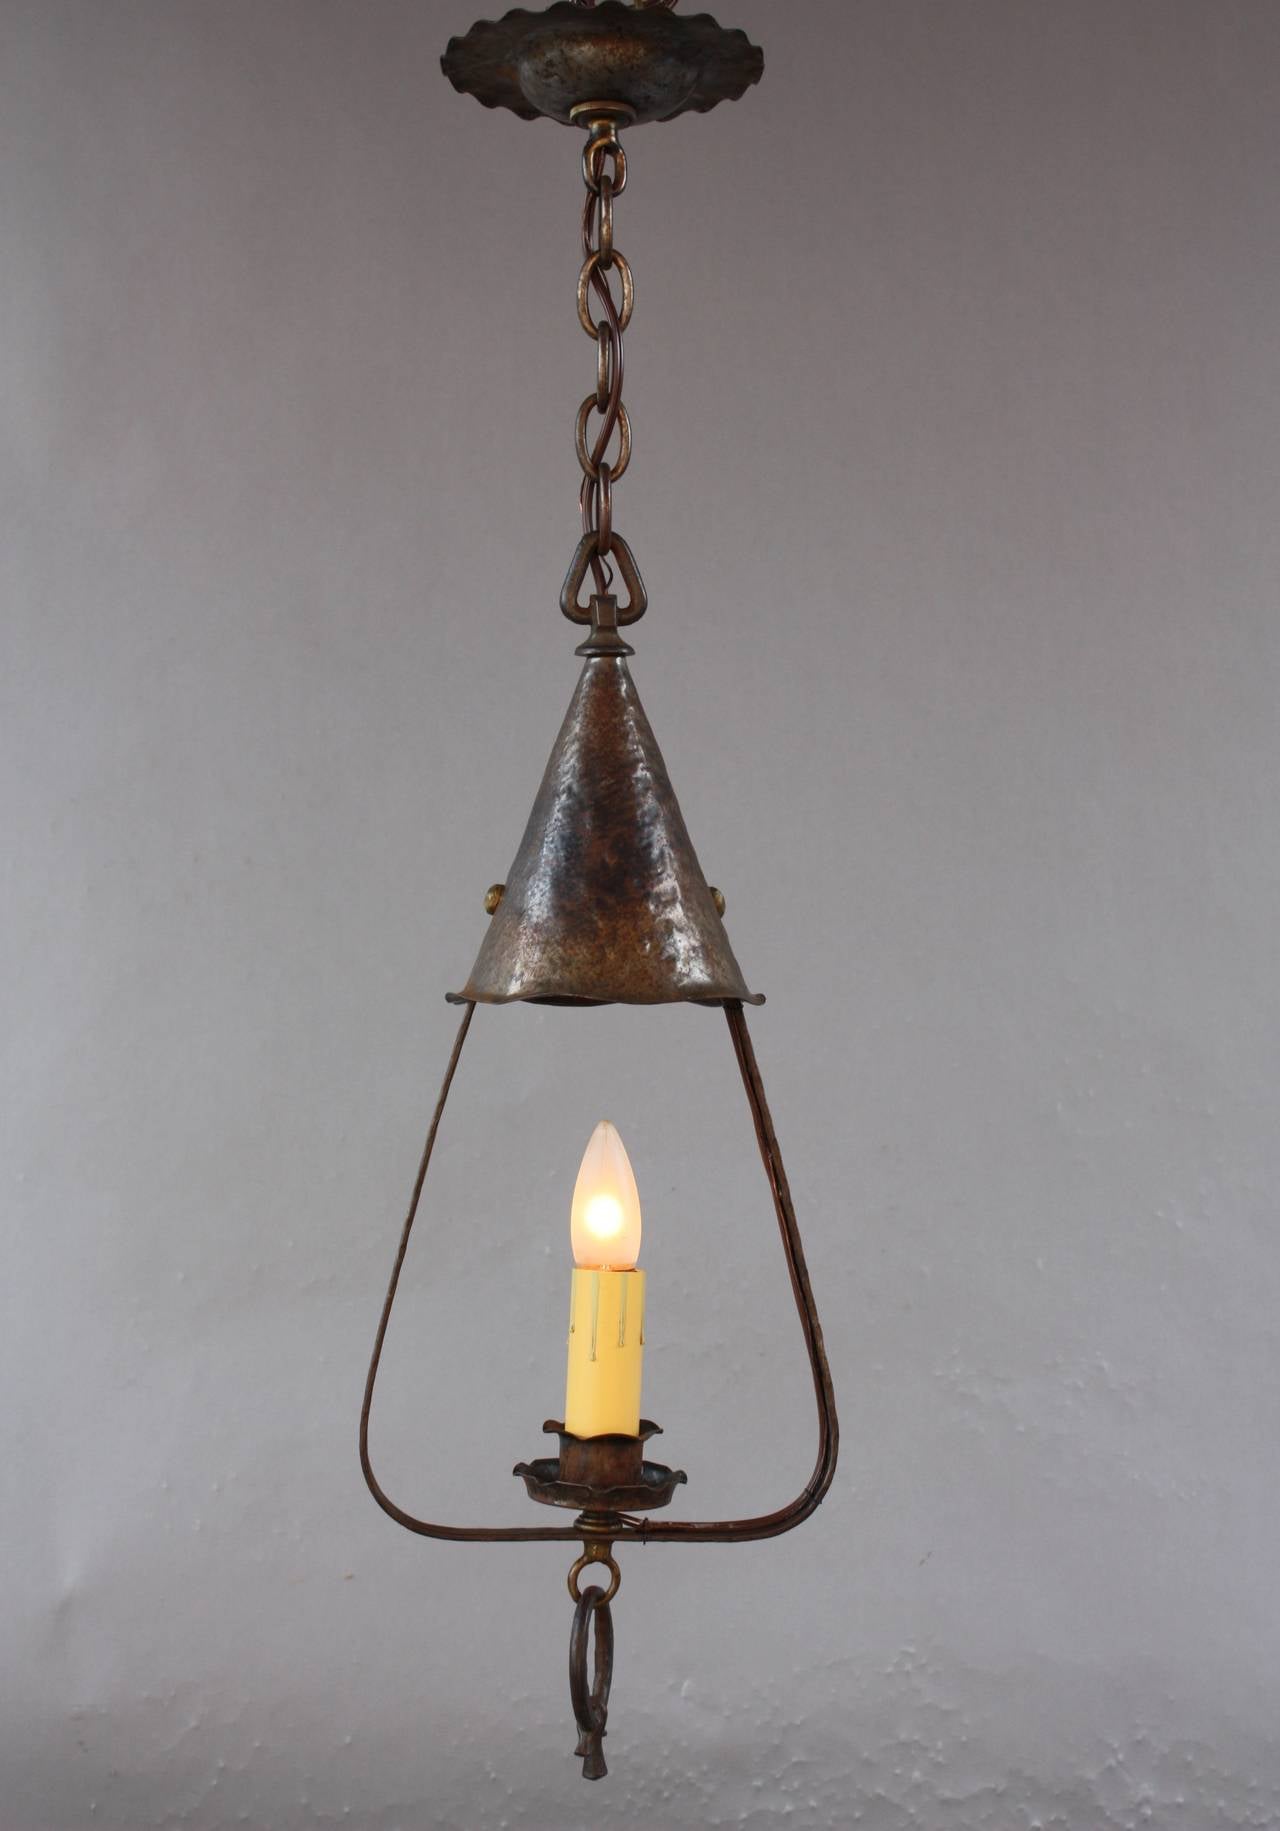 Charming cottage style pendant would fit well in Spanish Revival, Colonial and English Tudor home. Body of fixture is 22